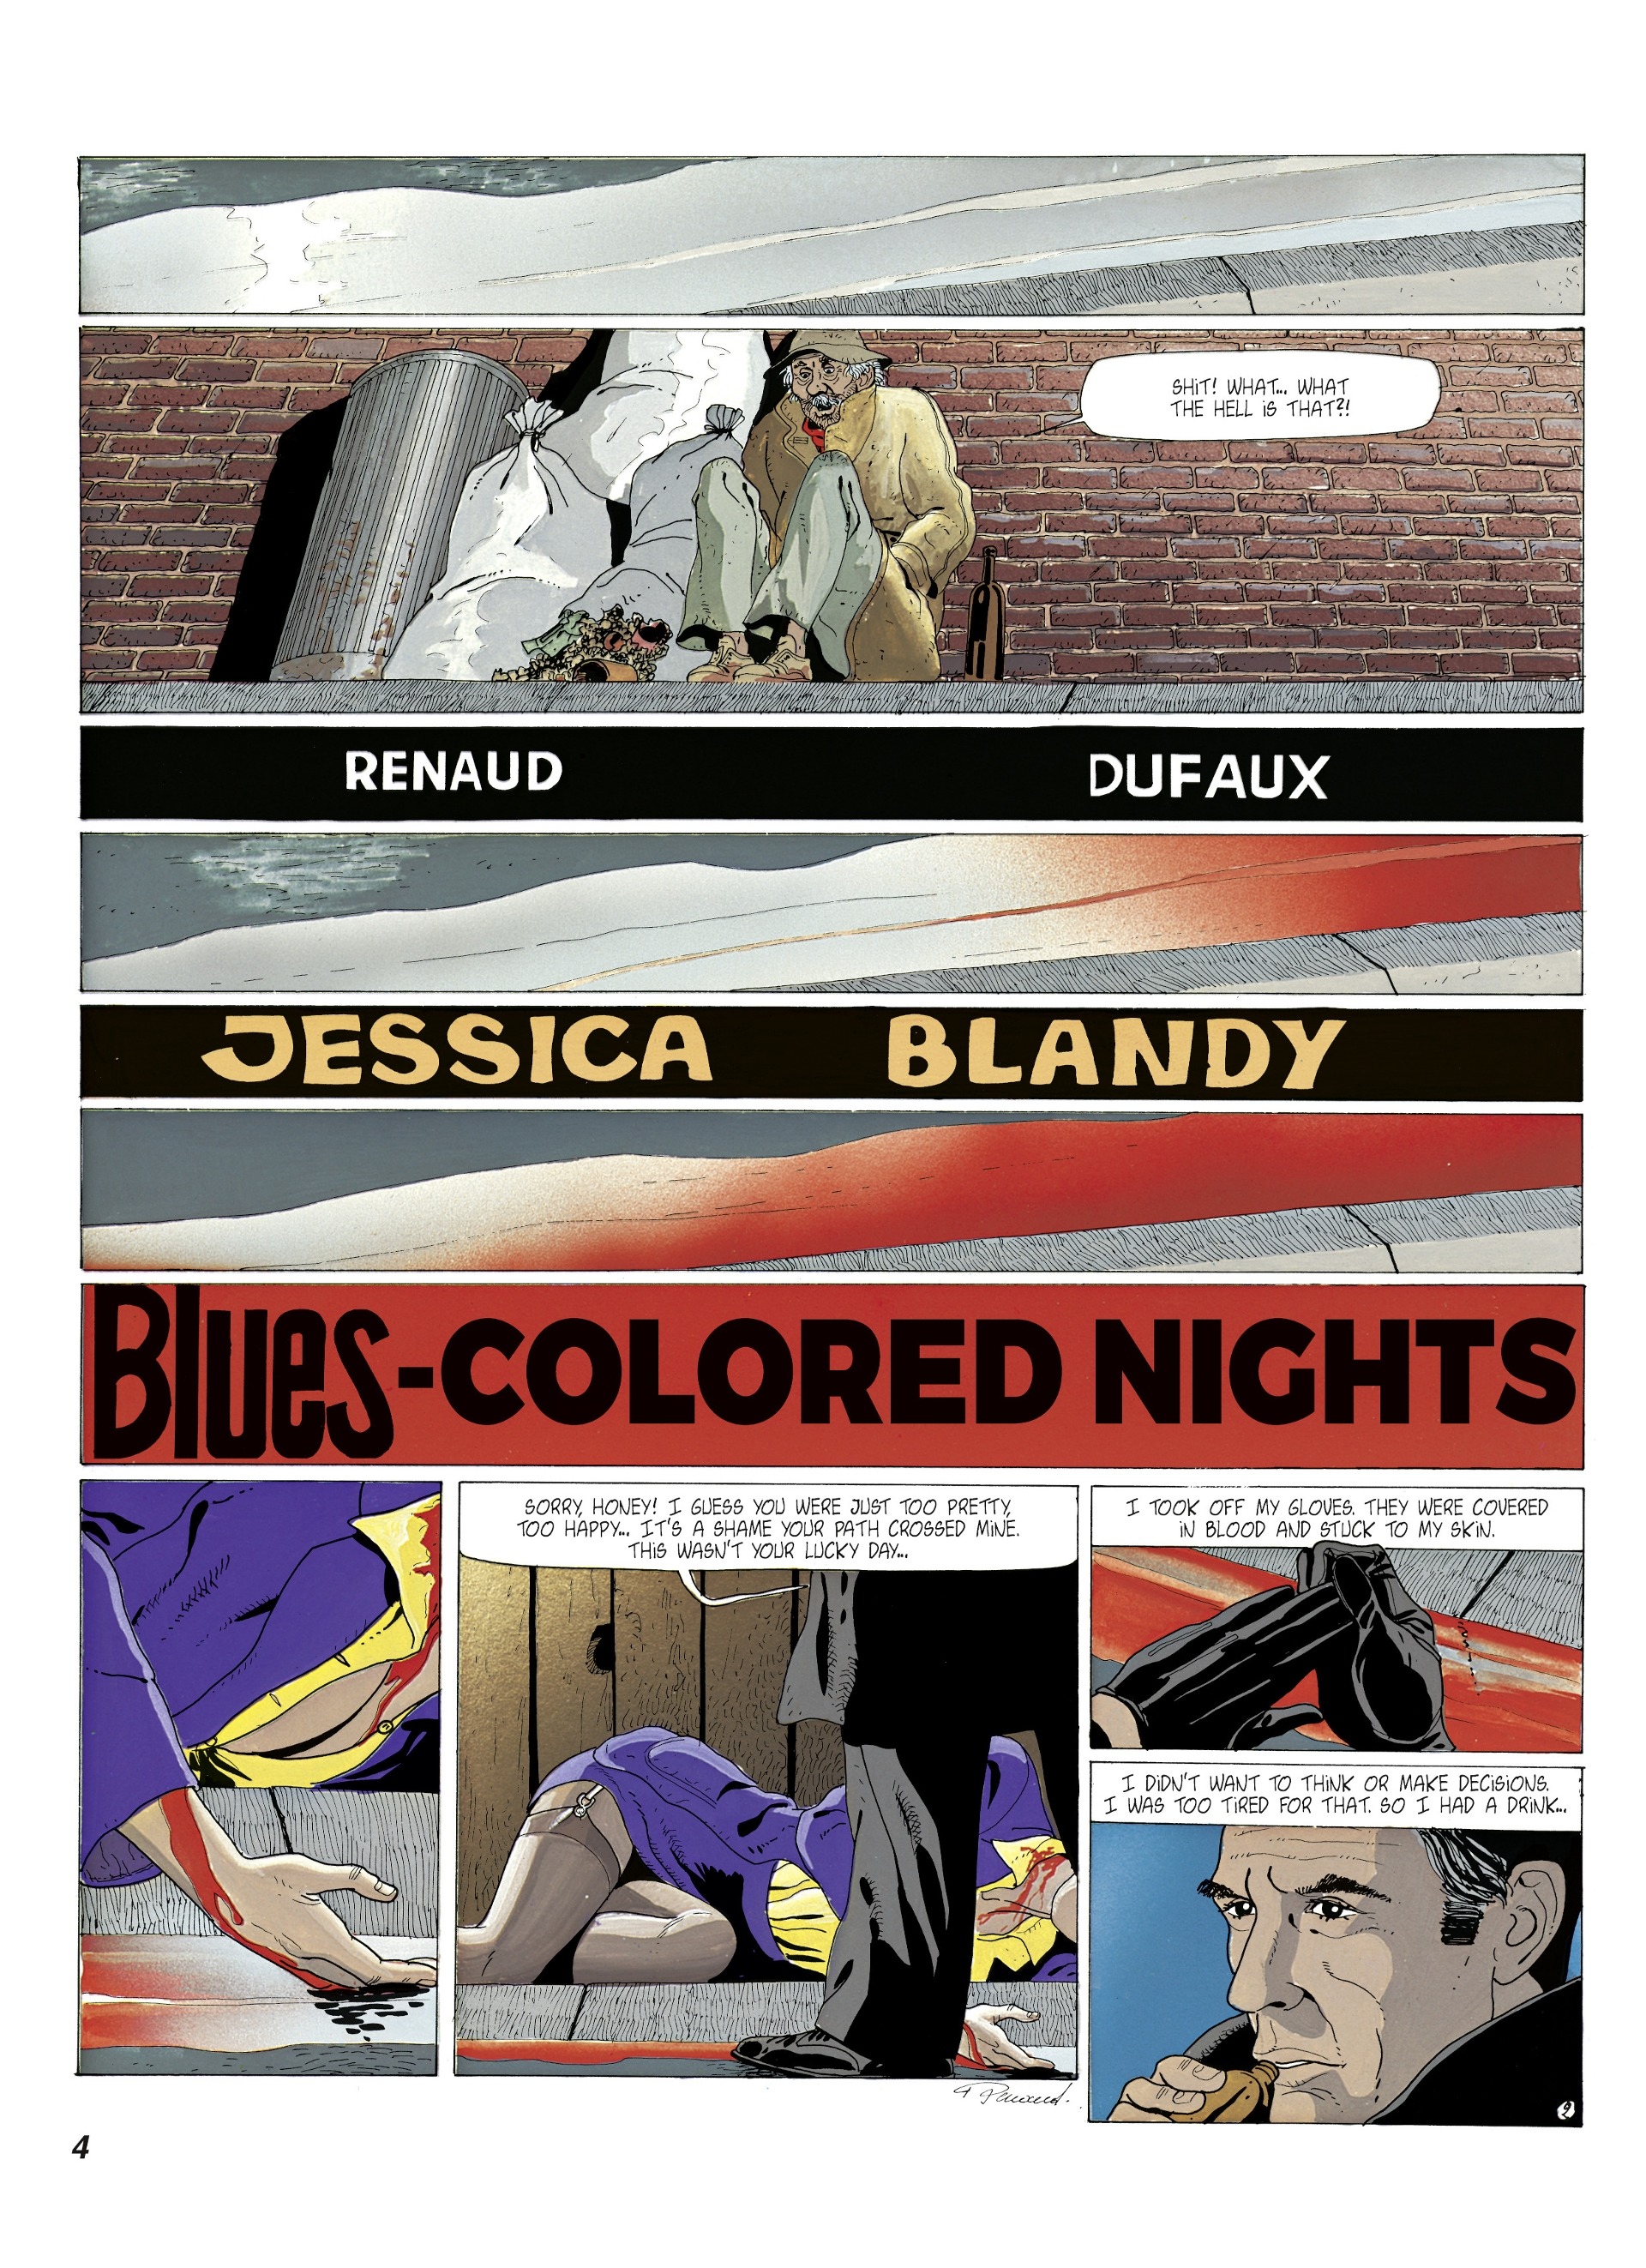 Jessica Blandy (2018-2019): Chapter 4 - Page 4